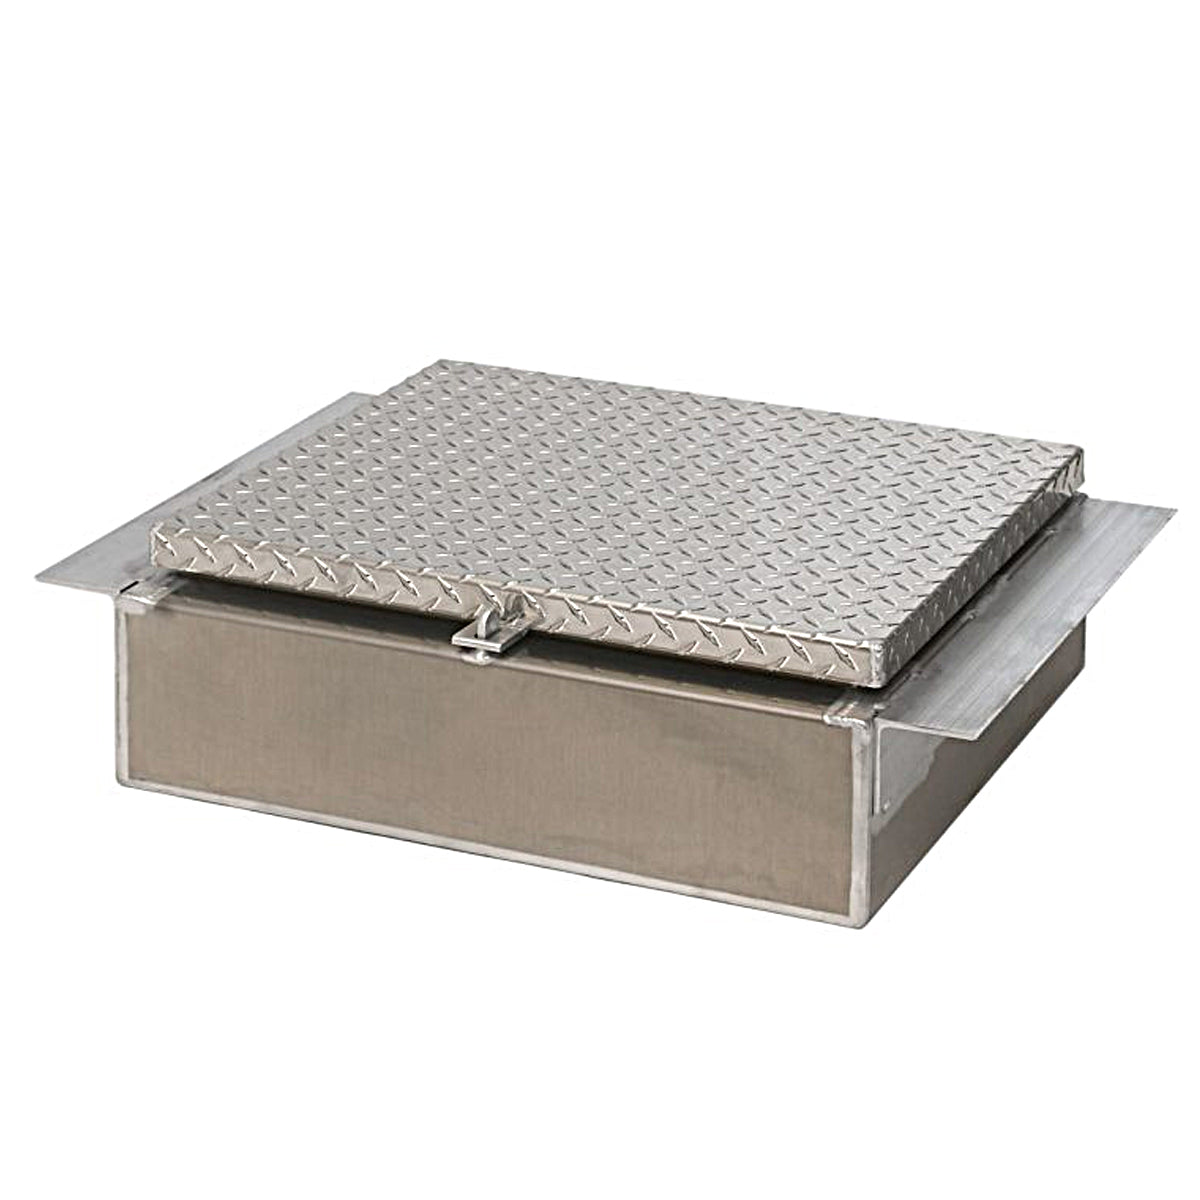 Pro-Tech Industries, Aluminum In-frame Tool Box